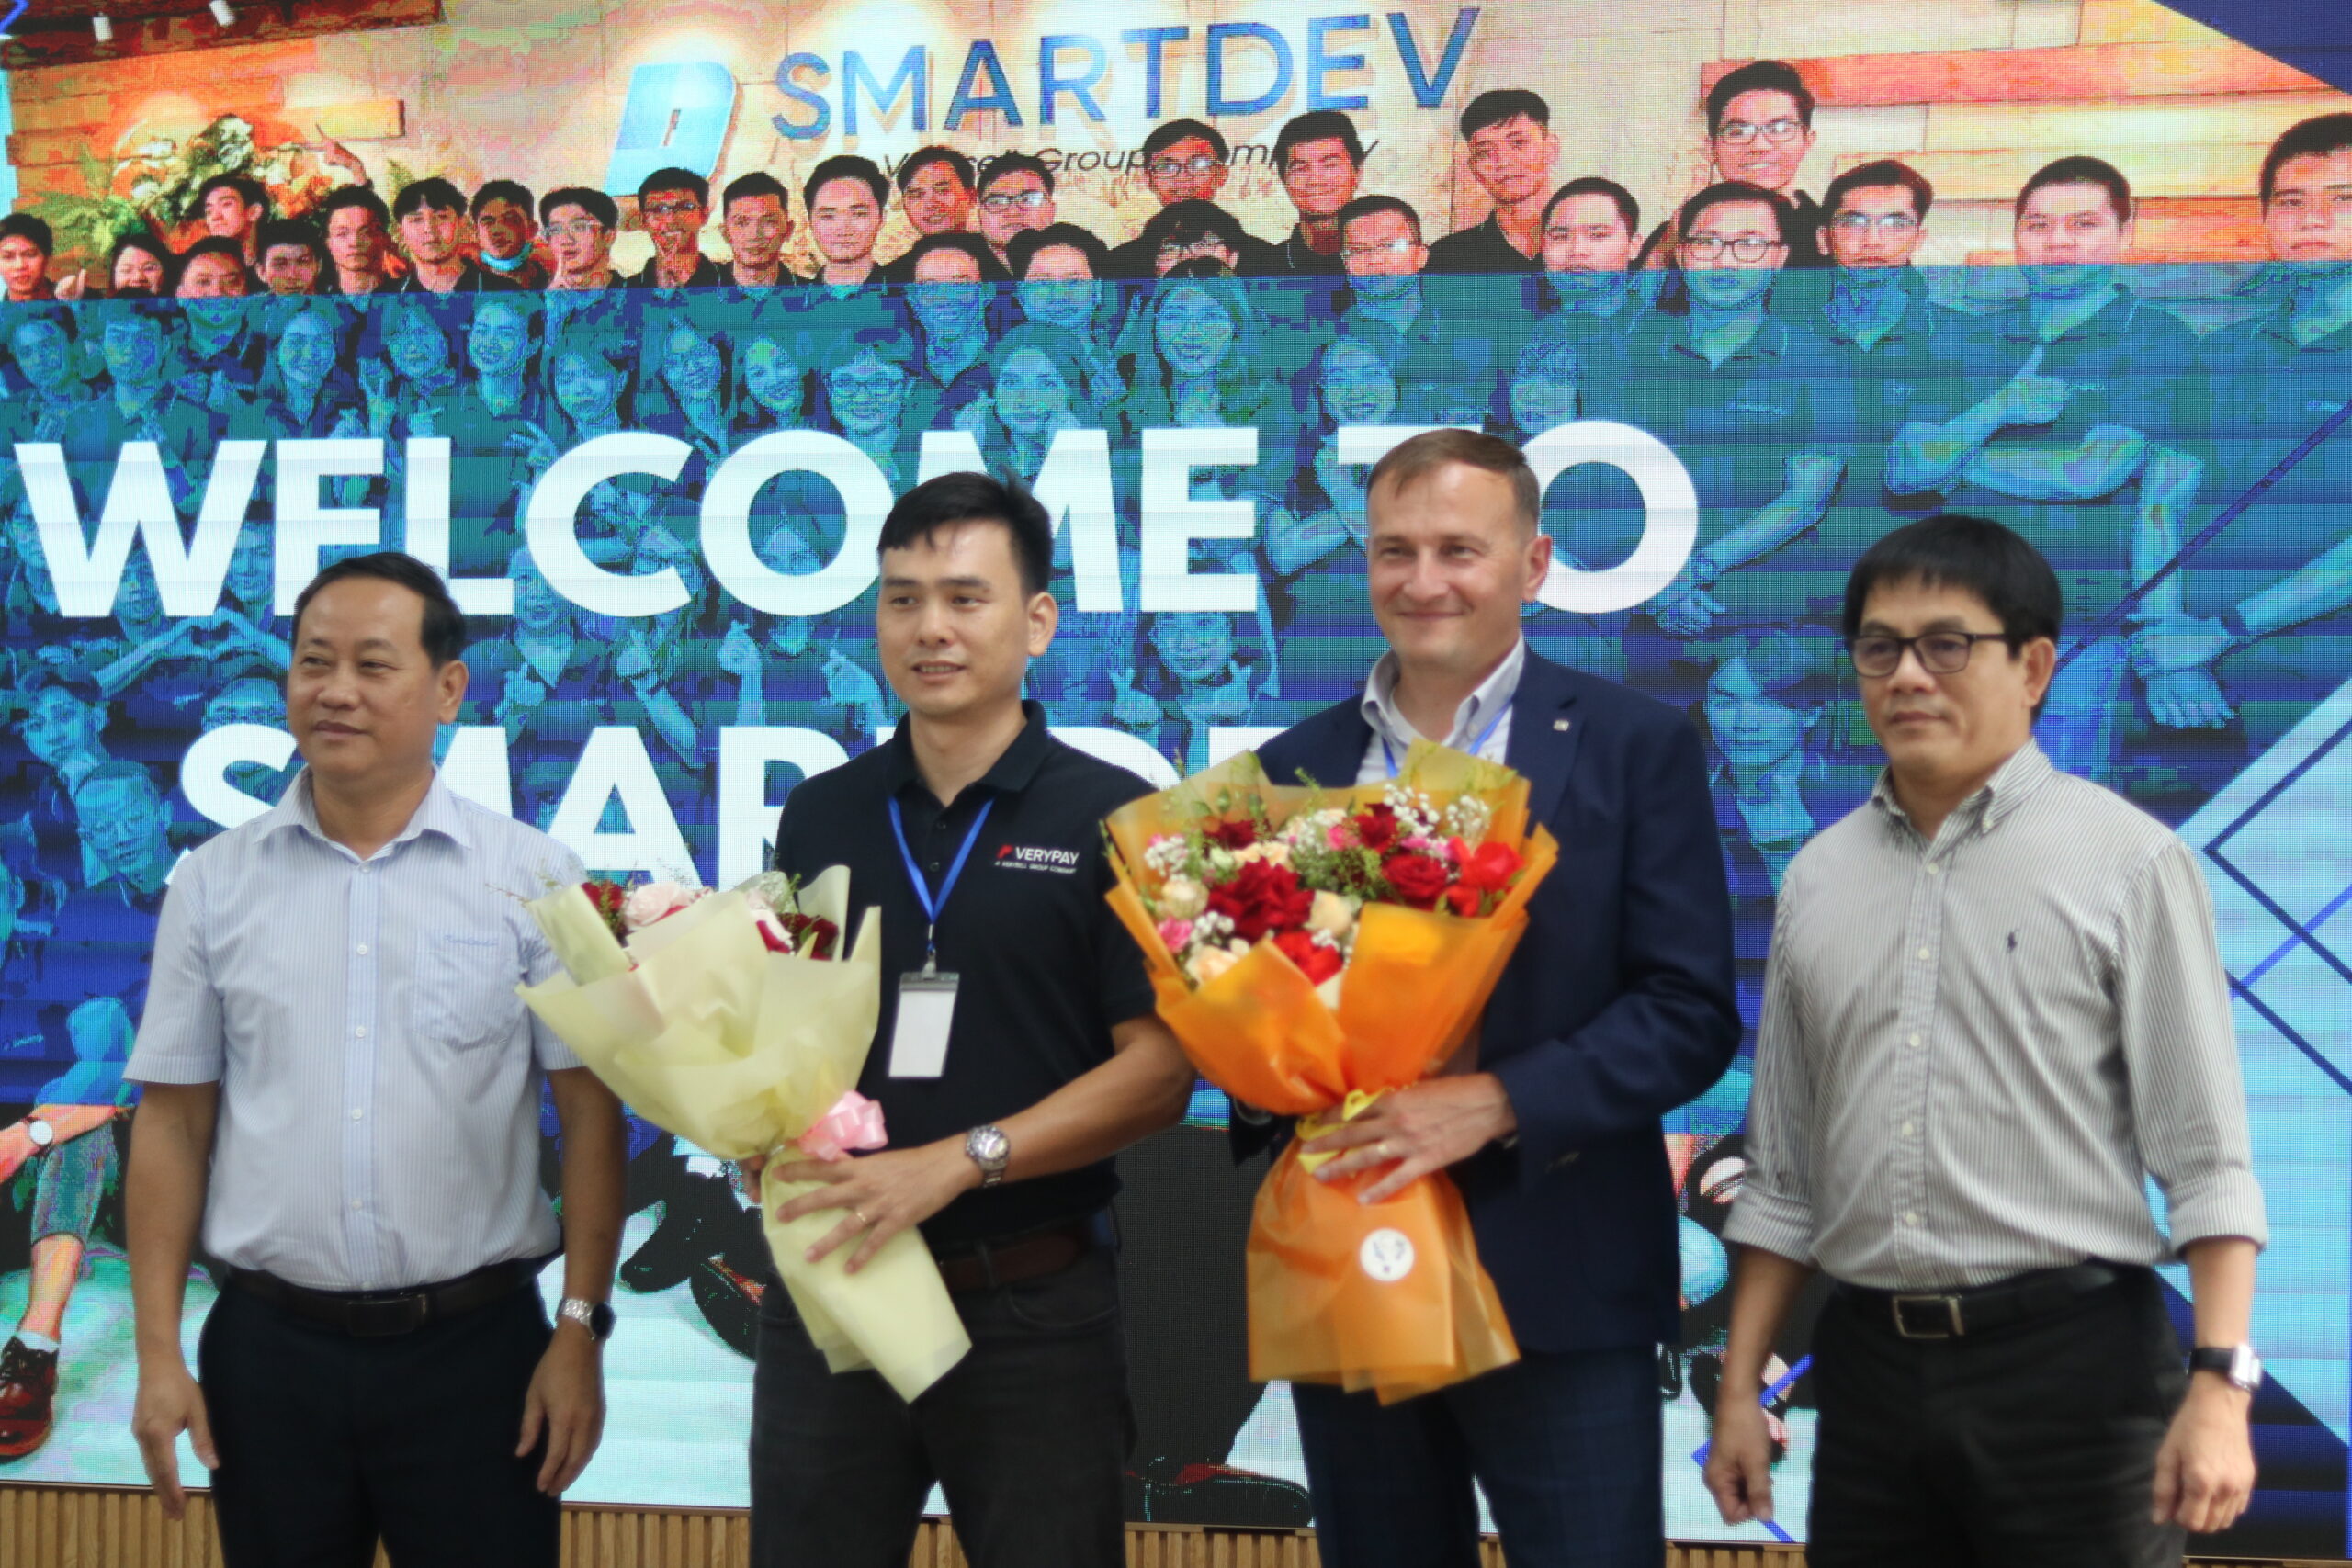 Event Speakers and Representatives from University of Da Nang scaled